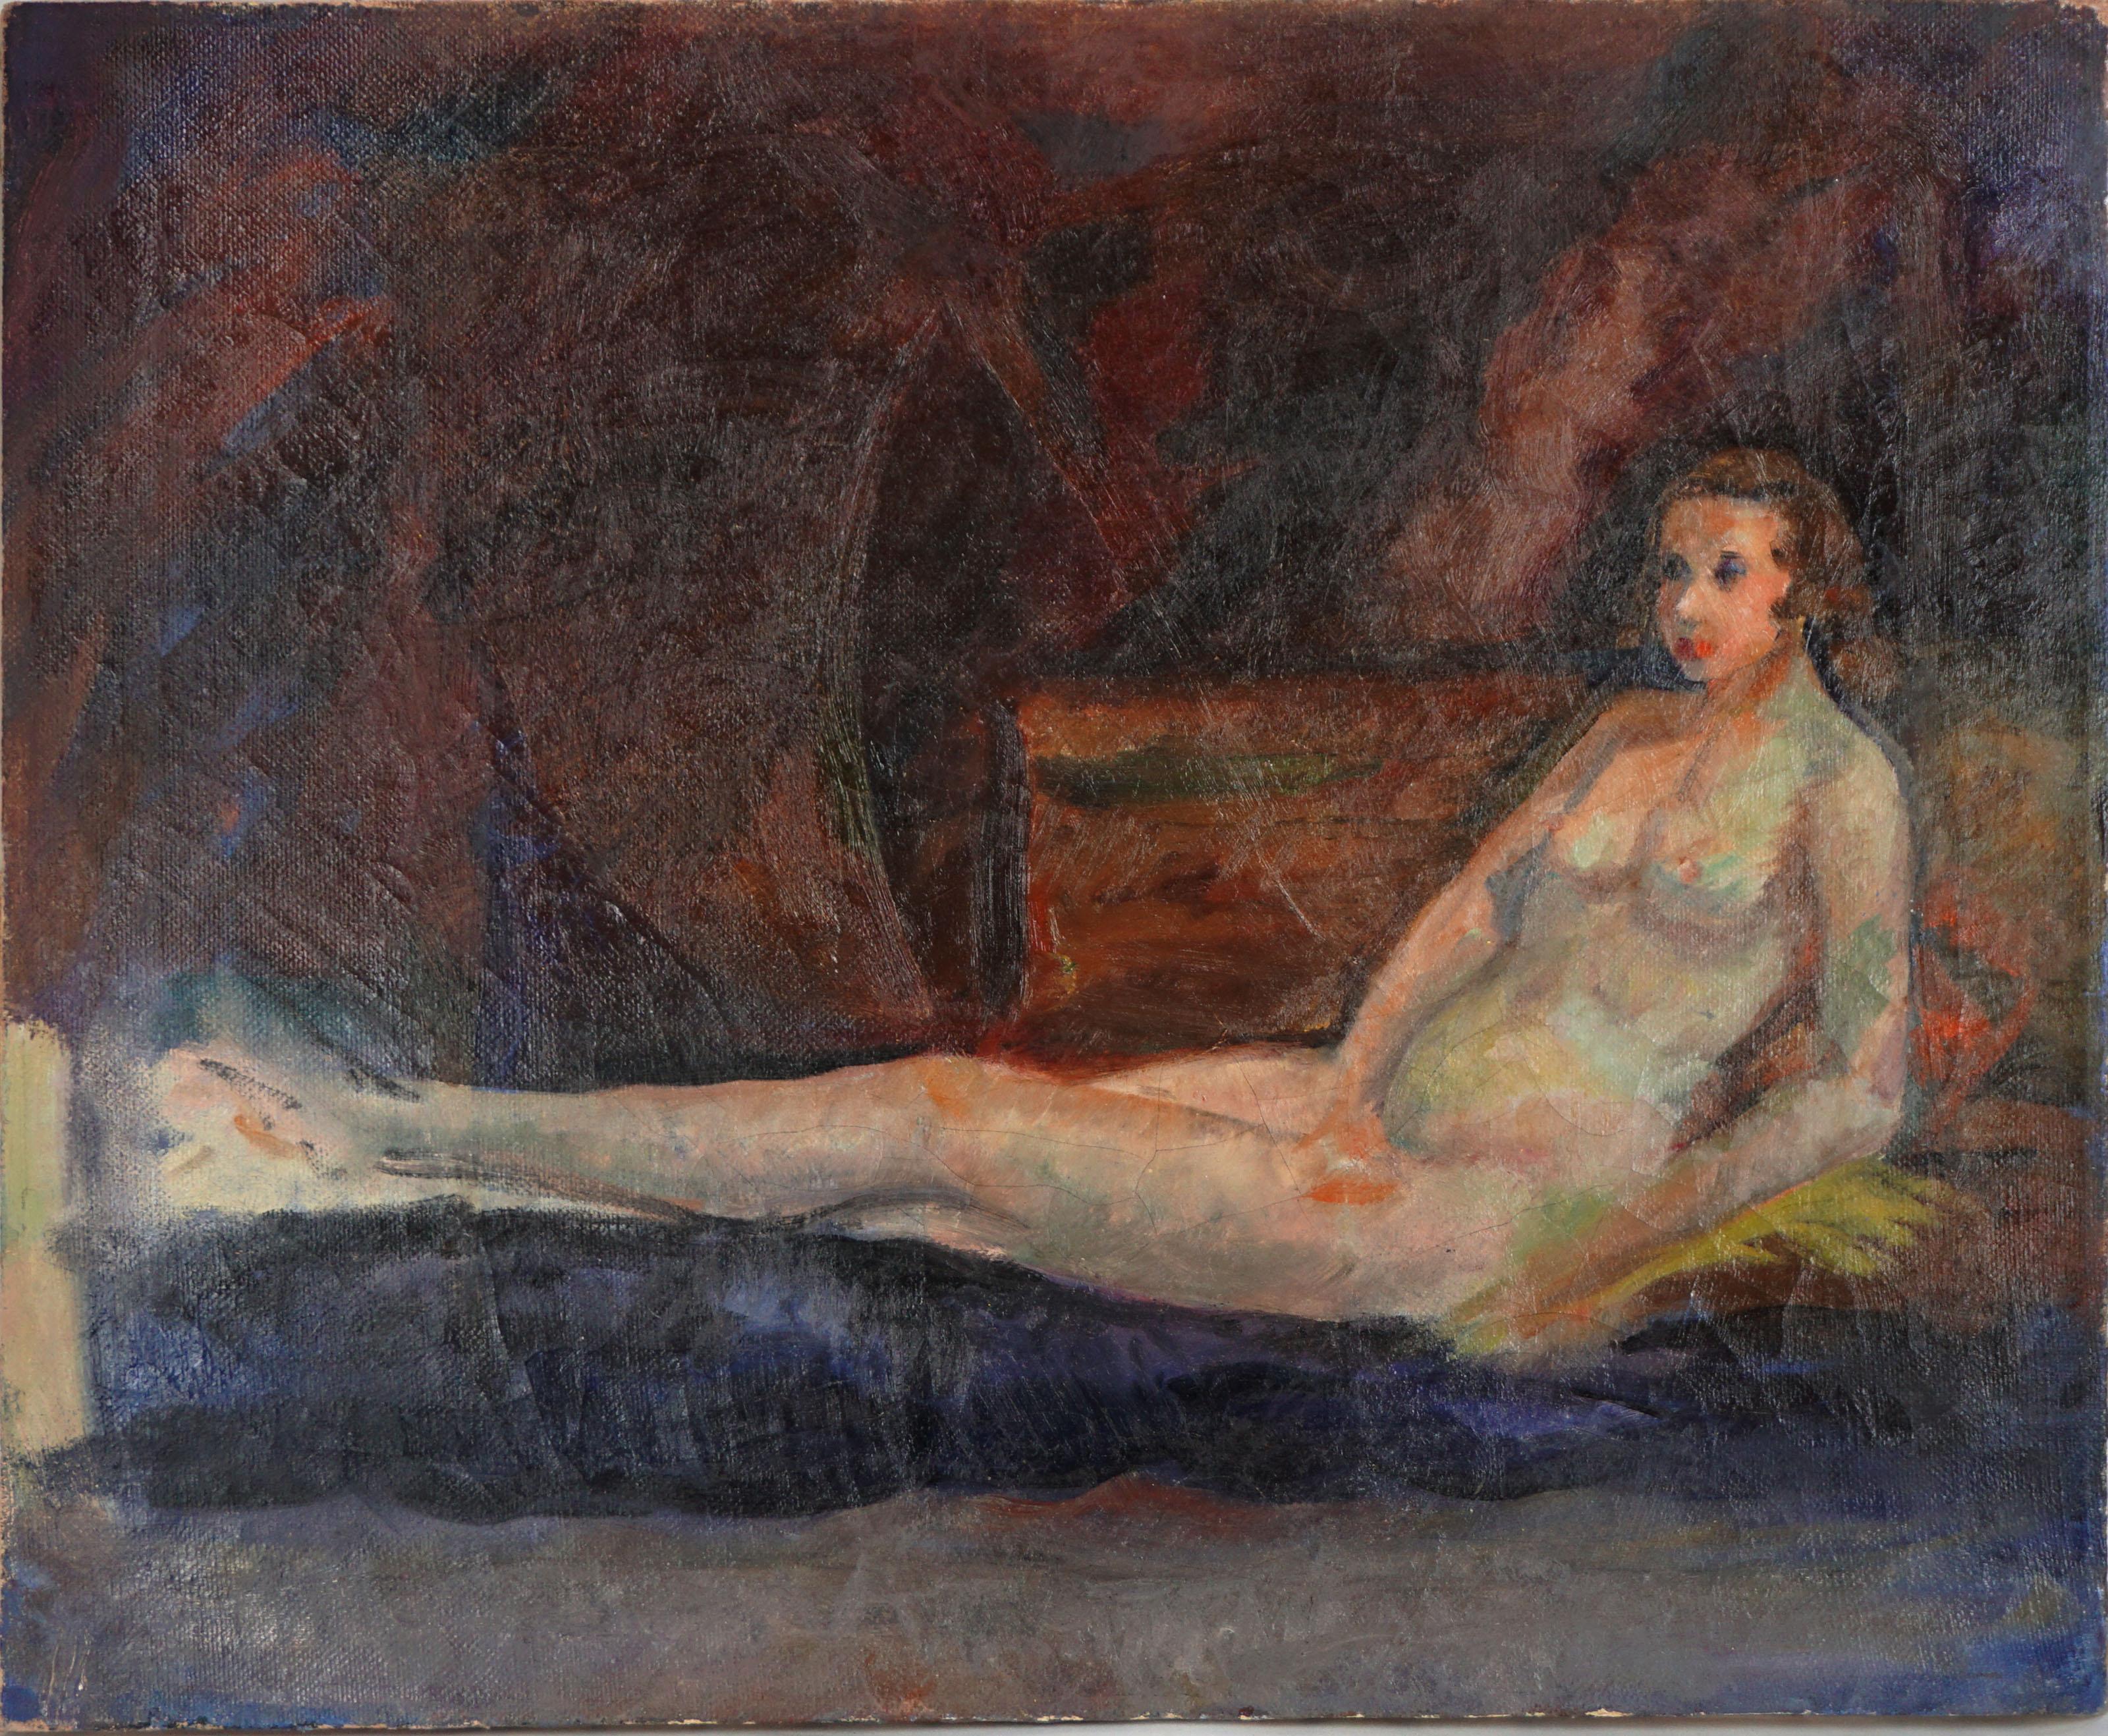 Figurative Painting Unknown - 1940s Modern Reclining Nude Oil Painting on Linen 